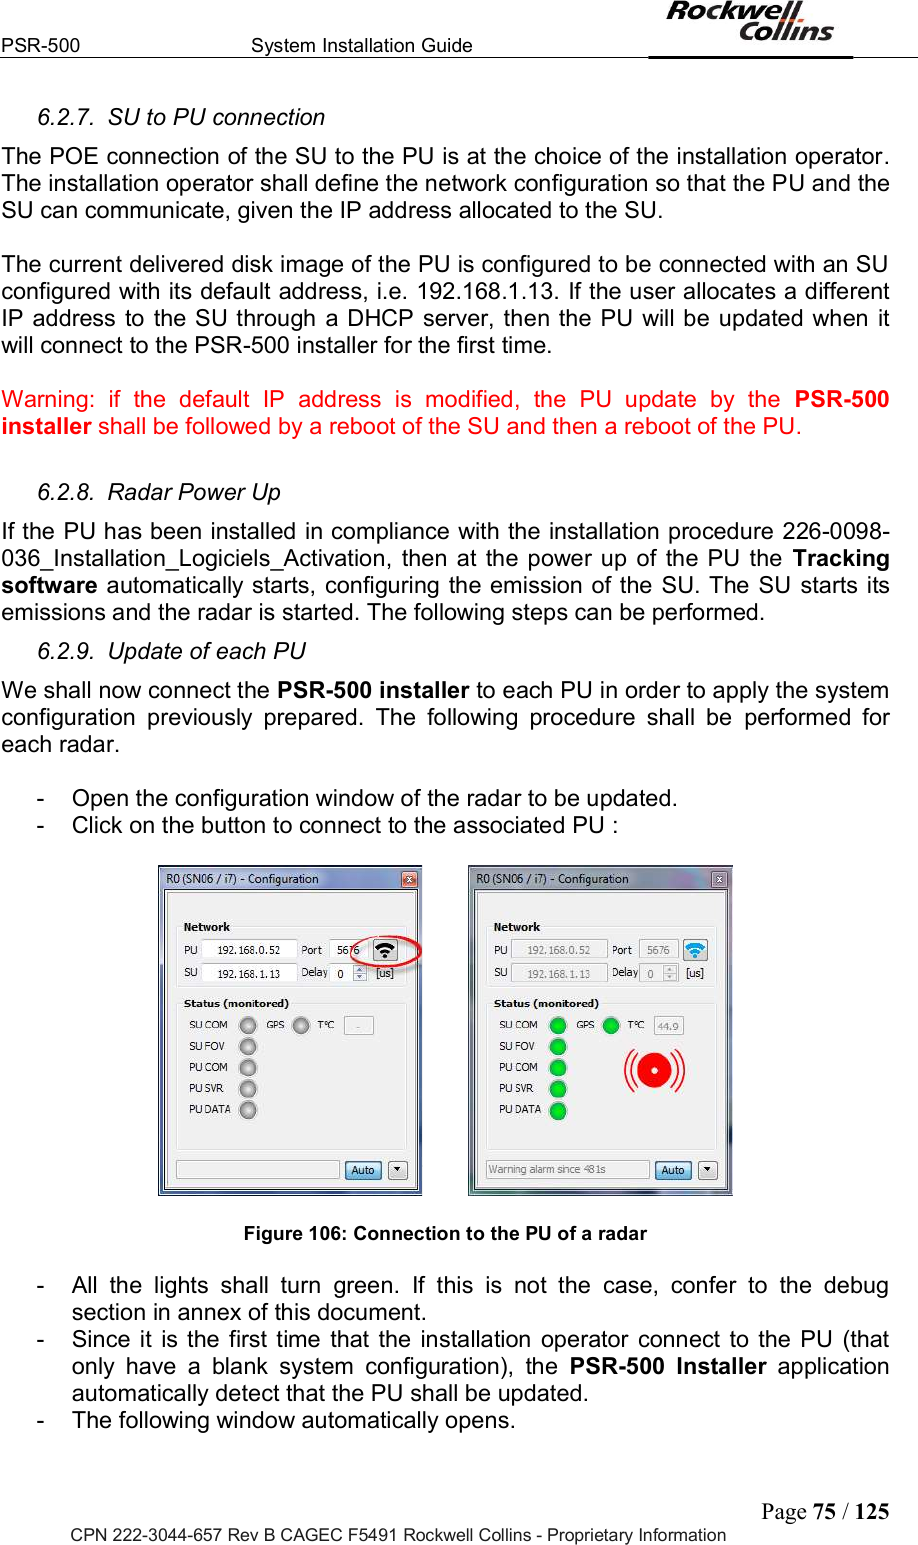 PSR-500  System Installation Guide  Page 75 / 125 CPN 222-3044-657 Rev B CAGEC F5491 Rockwell Collins - Proprietary Information 6.2.7.  SU to PU connection The POE connection of the SU to the PU is at the choice of the installation operator. The installation operator shall define the network configuration so that the PU and the SU can communicate, given the IP address allocated to the SU.   The current delivered disk image of the PU is configured to be connected with an SU configured with its default address, i.e. 192.168.1.13. If the user allocates a different IP address to the SU through a DHCP server, then the PU will be  updated when it will connect to the PSR-500 installer for the first time.   Warning:  if  the  default  IP  address  is  modified,  the  PU  update  by  the  PSR-500 installer shall be followed by a reboot of the SU and then a reboot of the PU.   6.2.8.  Radar Power Up  If the PU has been installed in compliance with the installation procedure 226-0098-036_Installation_Logiciels_Activation,  then  at  the power  up of  the  PU  the  Tracking software automatically starts, configuring the emission of the SU. The SU starts its emissions and the radar is started. The following steps can be performed.  6.2.9.  Update of each PU  We shall now connect the PSR-500 installer to each PU in order to apply the system configuration  previously  prepared.  The  following  procedure  shall  be  performed  for each radar.   -  Open the configuration window of the radar to be updated.  -  Click on the button to connect to the associated PU :             Figure 106: Connection to the PU of a radar  -  All  the  lights  shall  turn  green.  If  this  is  not  the  case,  confer  to  the  debug section in annex of this document. -  Since  it  is  the  first  time  that  the  installation  operator  connect  to the PU  (that only  have  a  blank  system  configuration),  the  PSR-500  Installer  application automatically detect that the PU shall be updated.  -  The following window automatically opens.   